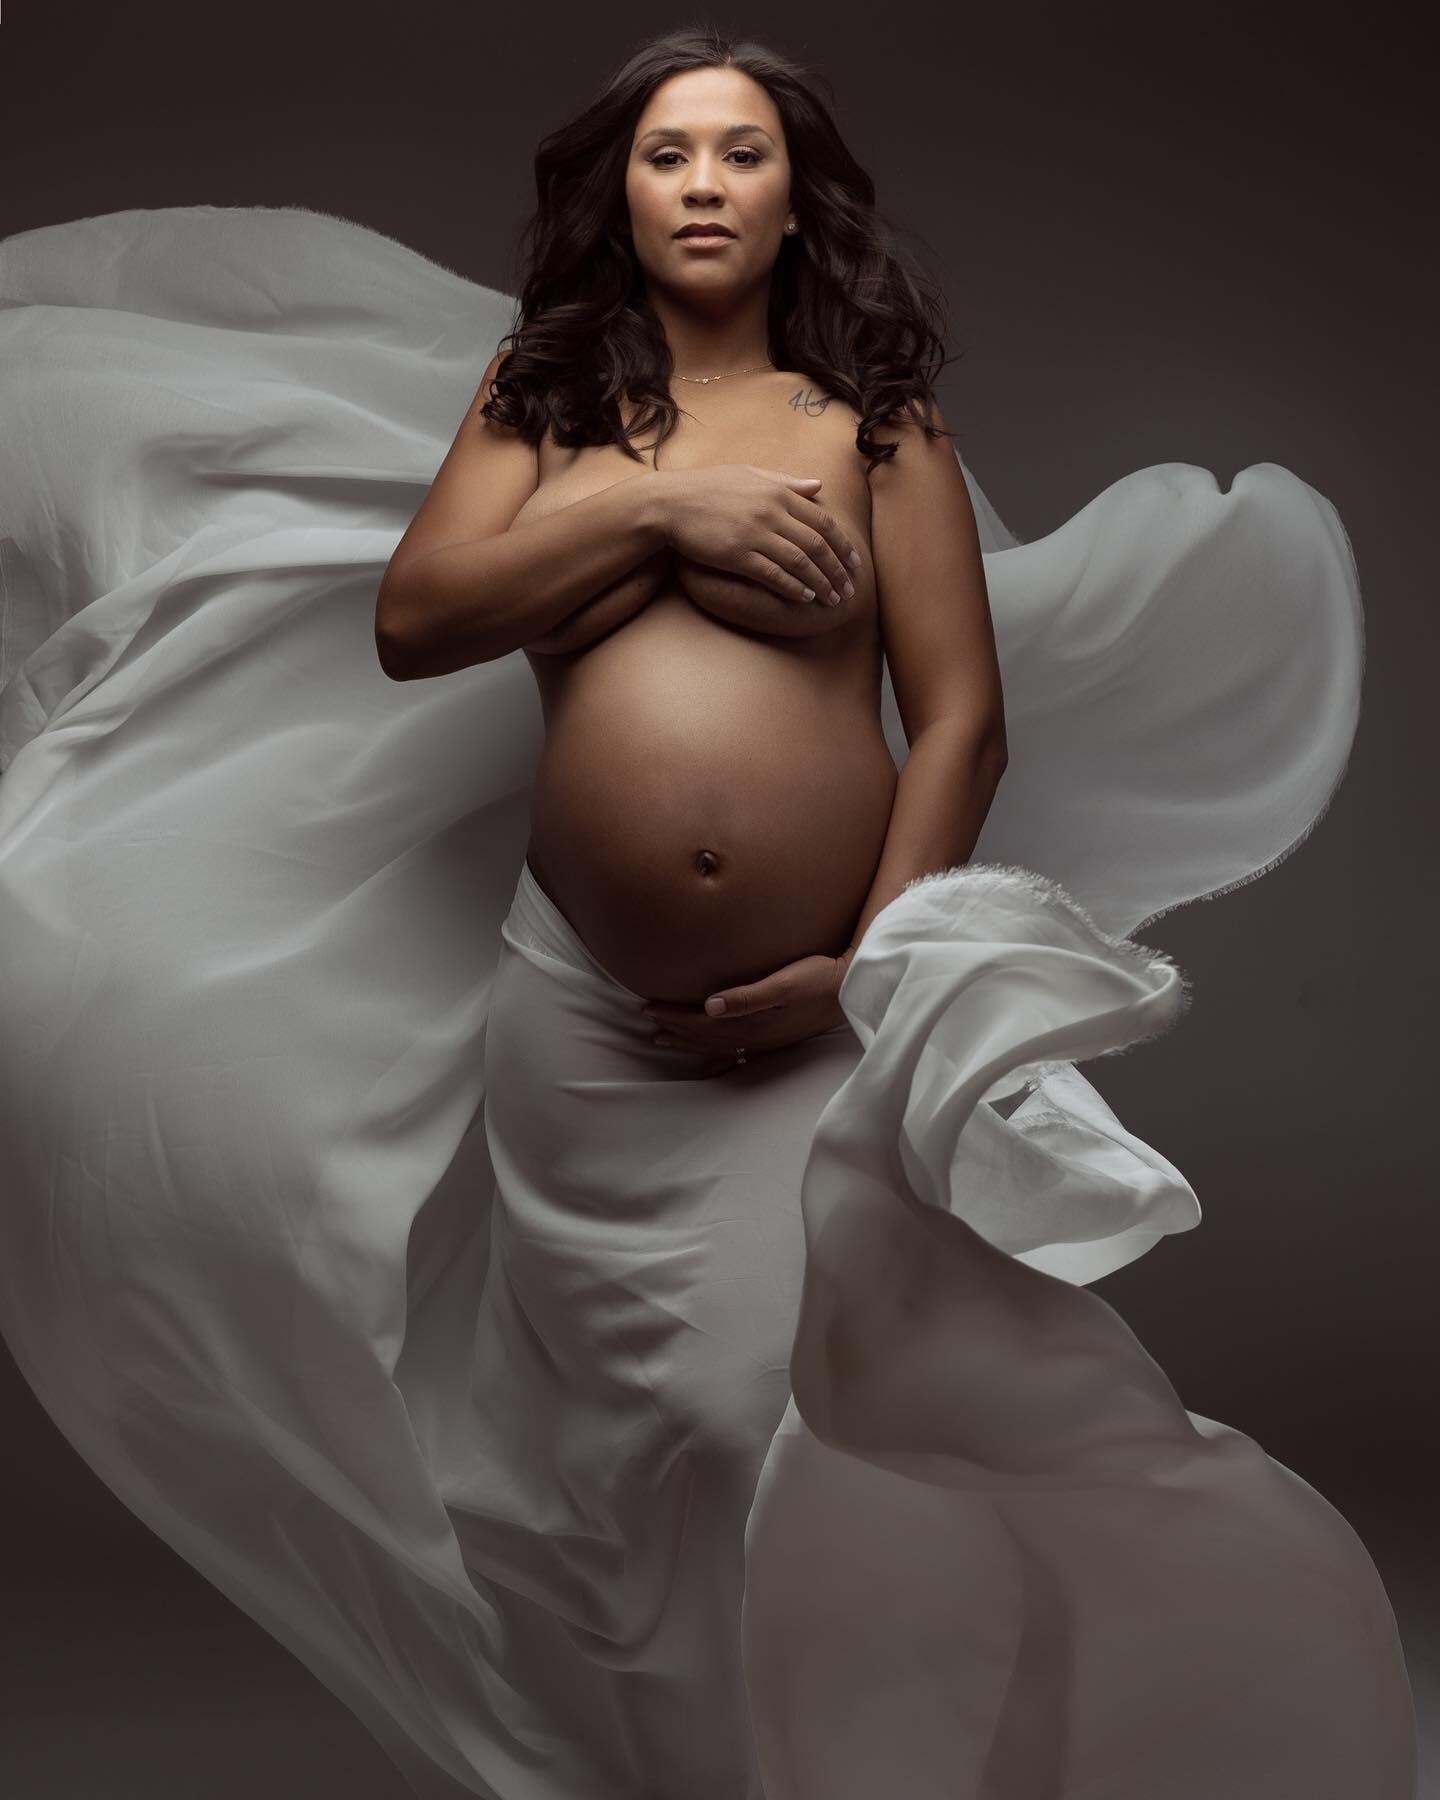 It's the classics that never go out of style especially when that style is executed flawlessly.  And this beautiful mother-to-be is rocking a classic, silk maternity dress that flows gracefully in the air as she confidently poses during her maternity